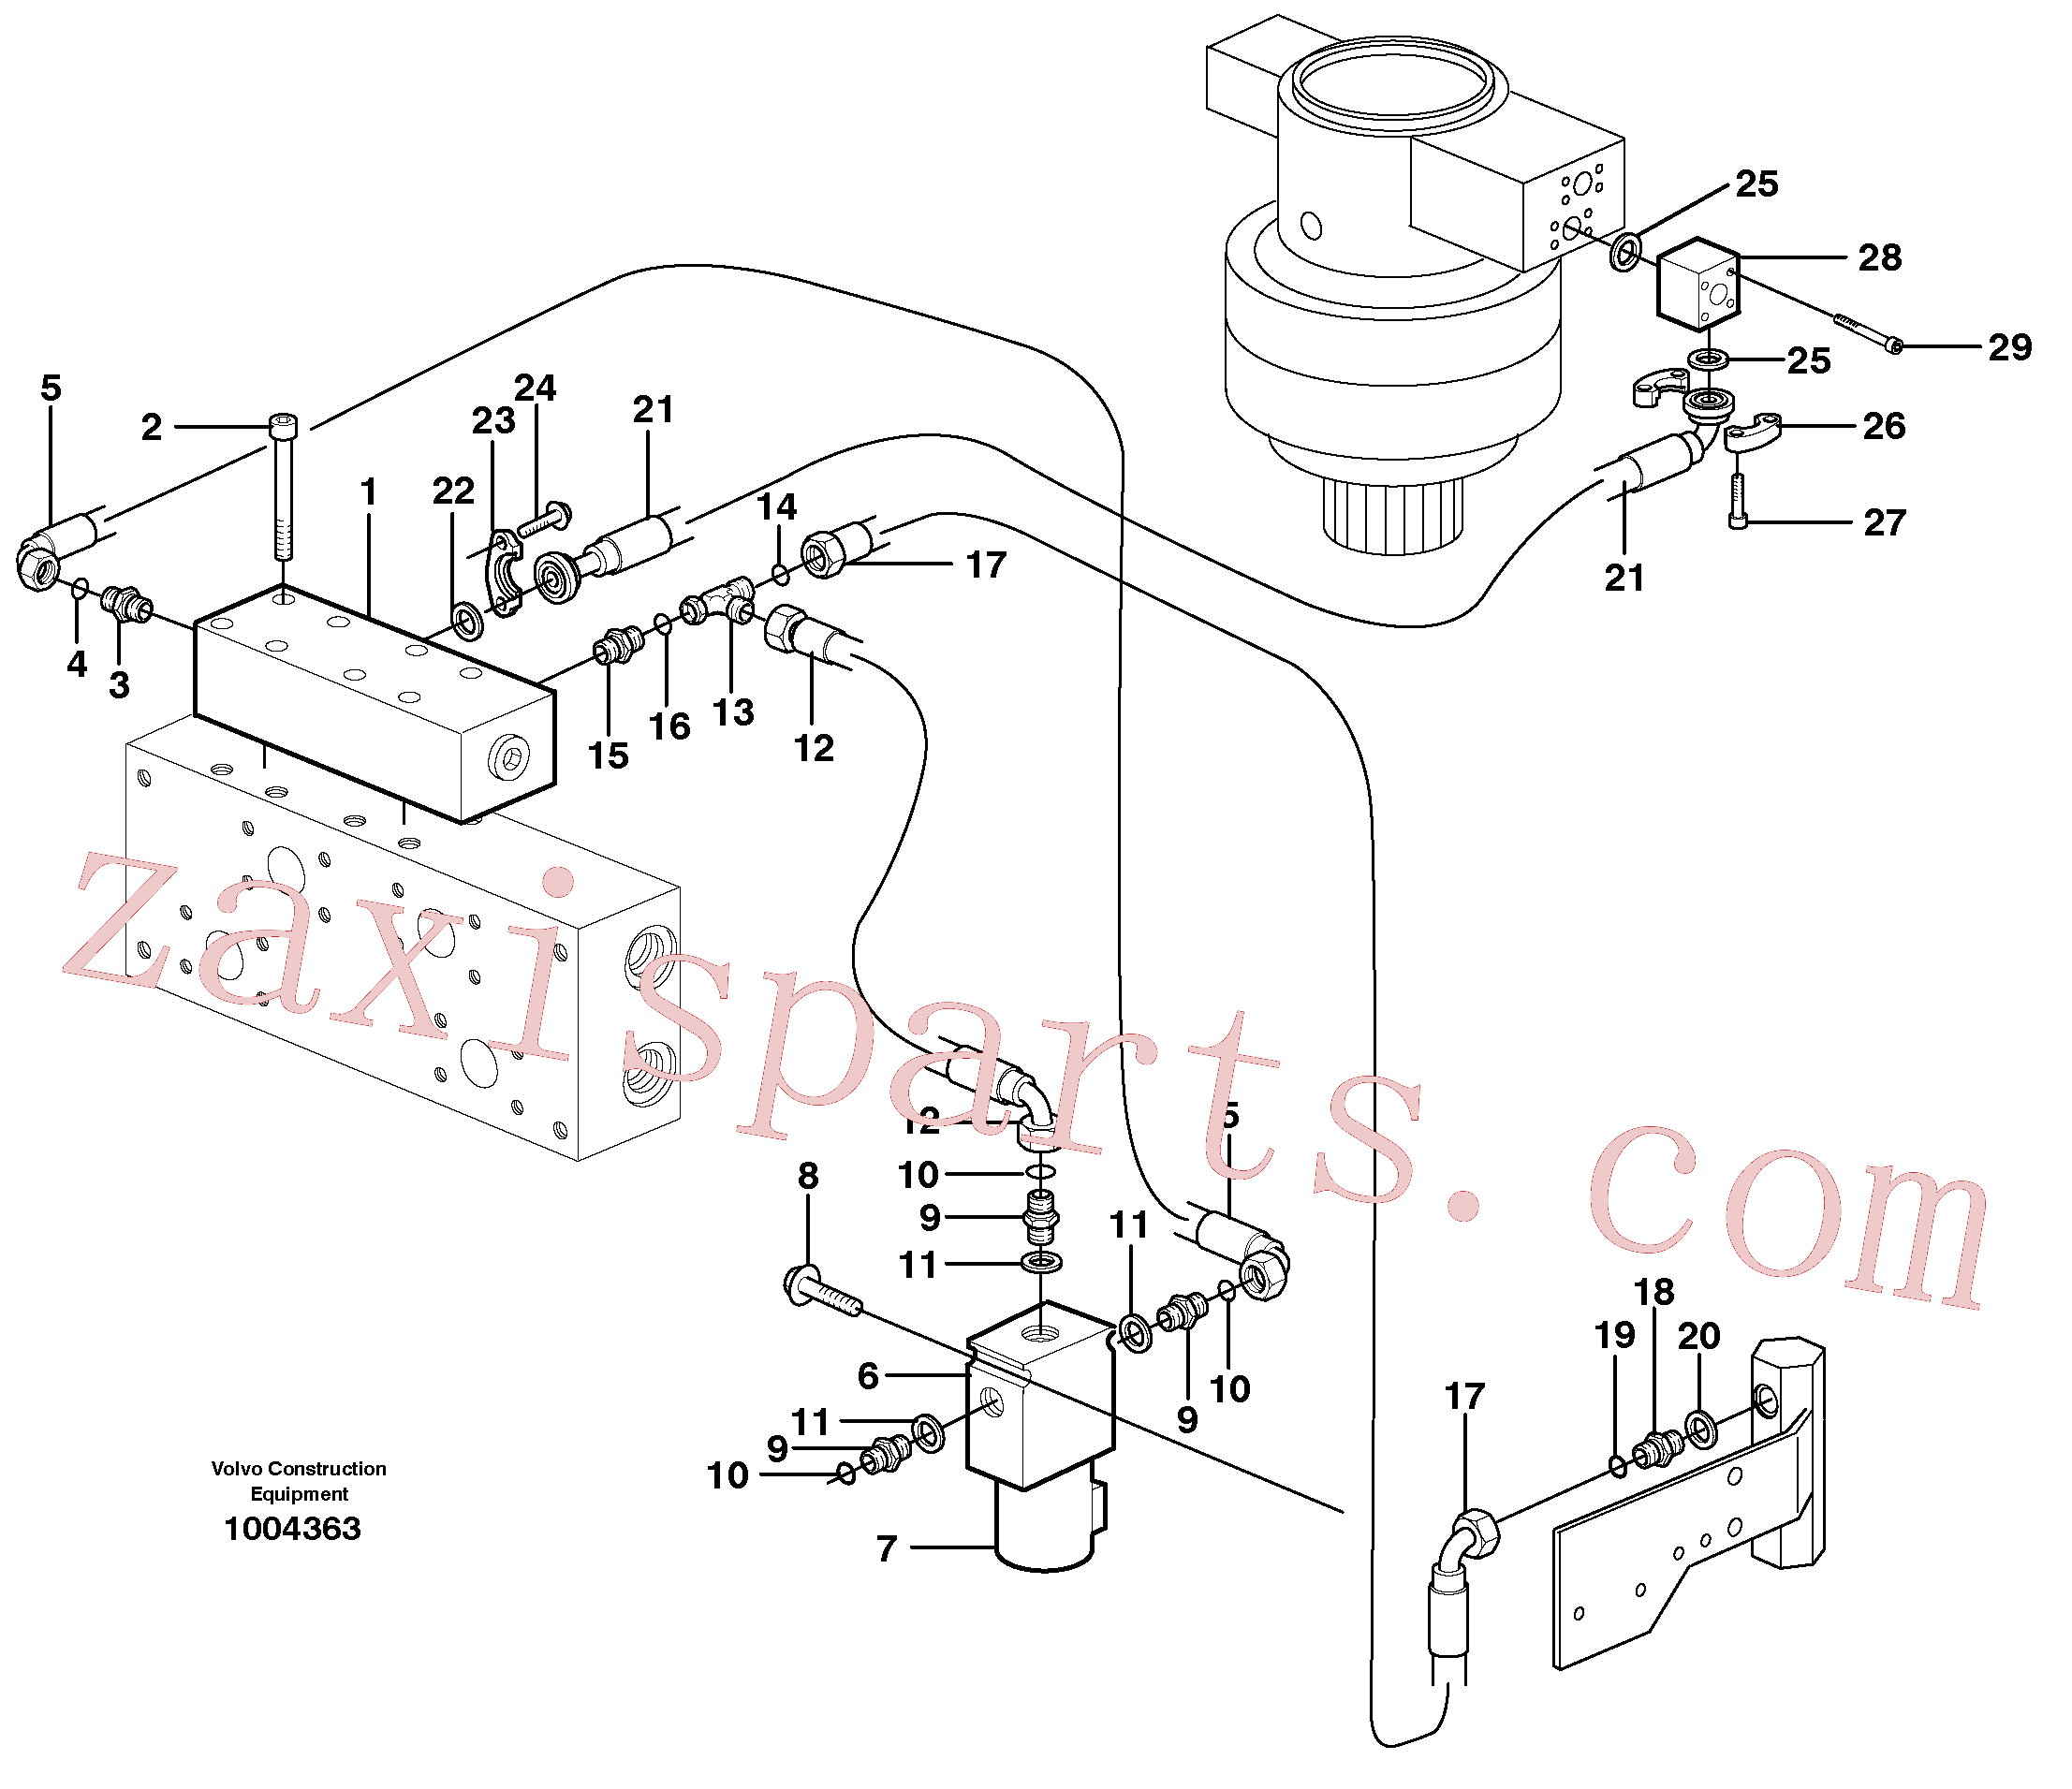 VOE14371747 for Volvo Hydraulic system, Float position valve(1004363 assembly)